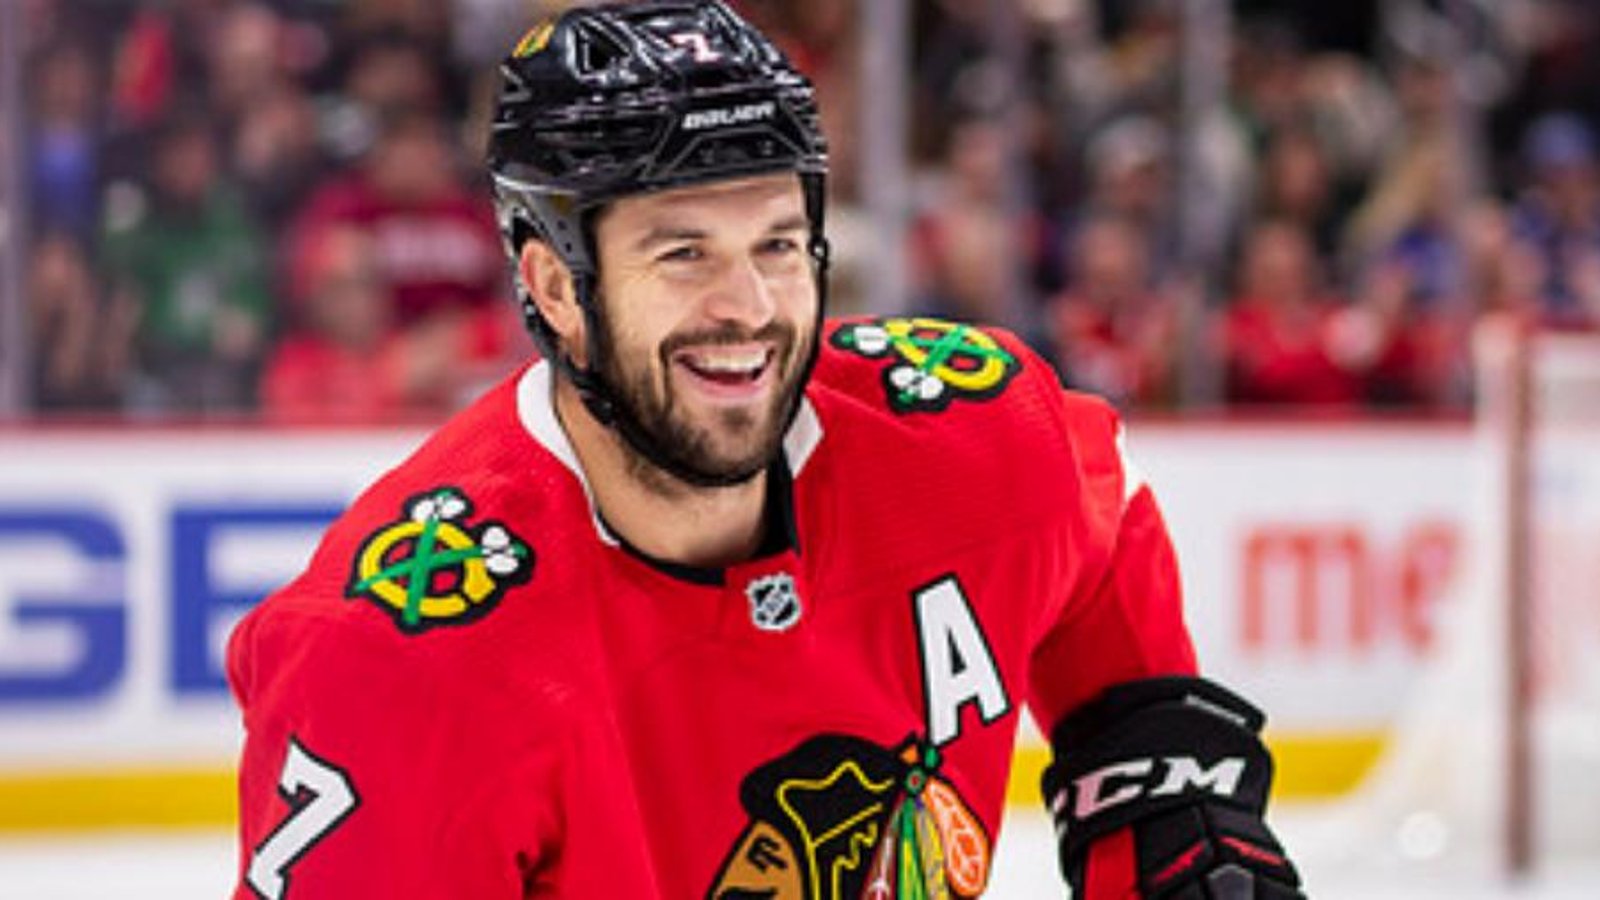 Brent Seabrook's contract once again casts a shadow over the Blackhawks.